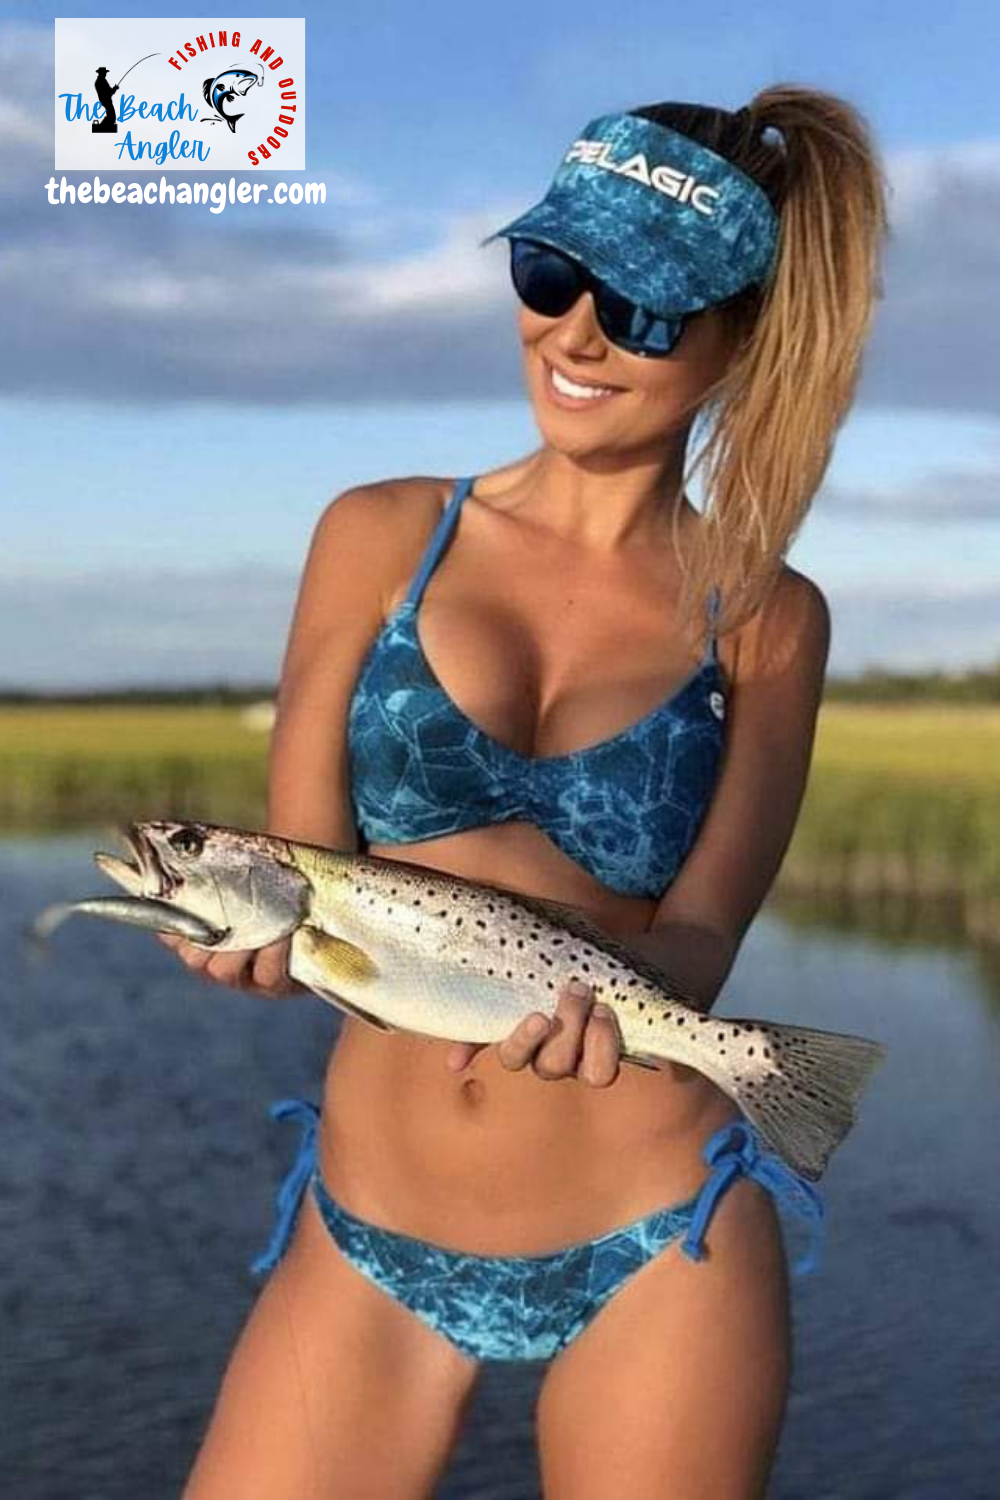 surf fishing gulf shores alabama - Bikini clad lady angler holding a nice speckled trout caught in Gulf Shores Alabama